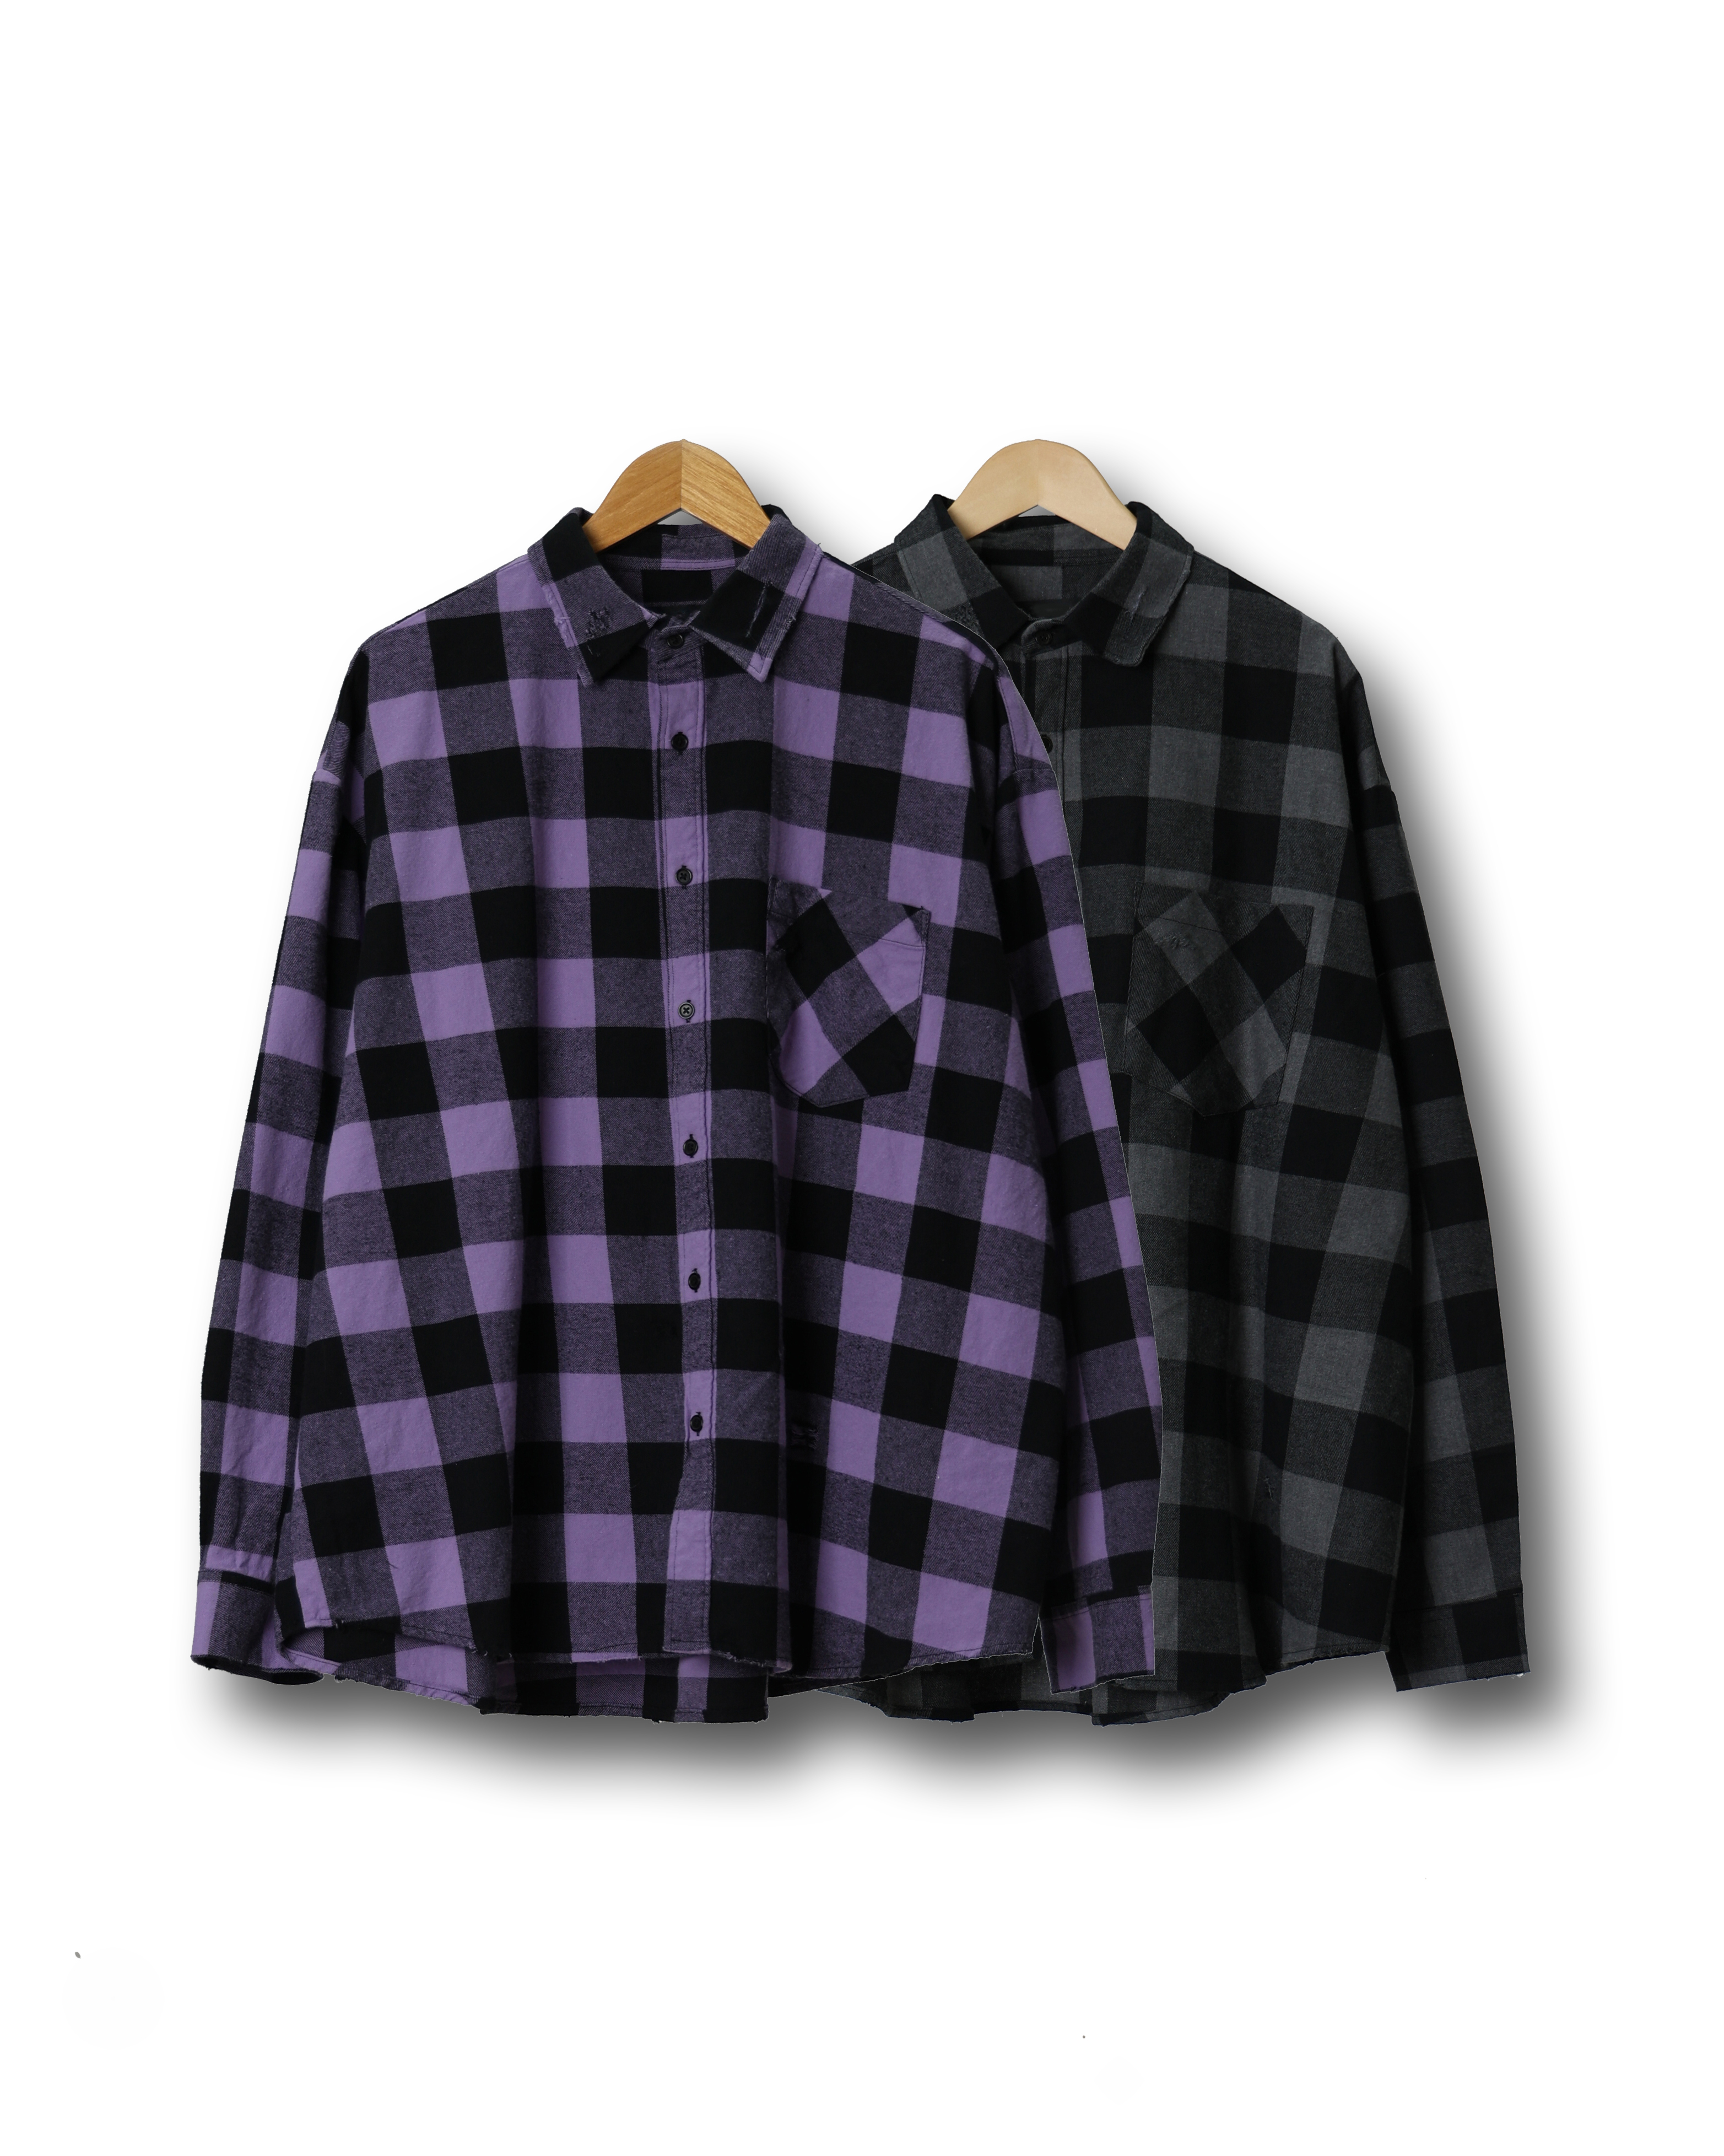 GLAM Vintage Check Over Shirts (Charcoal/Purple)